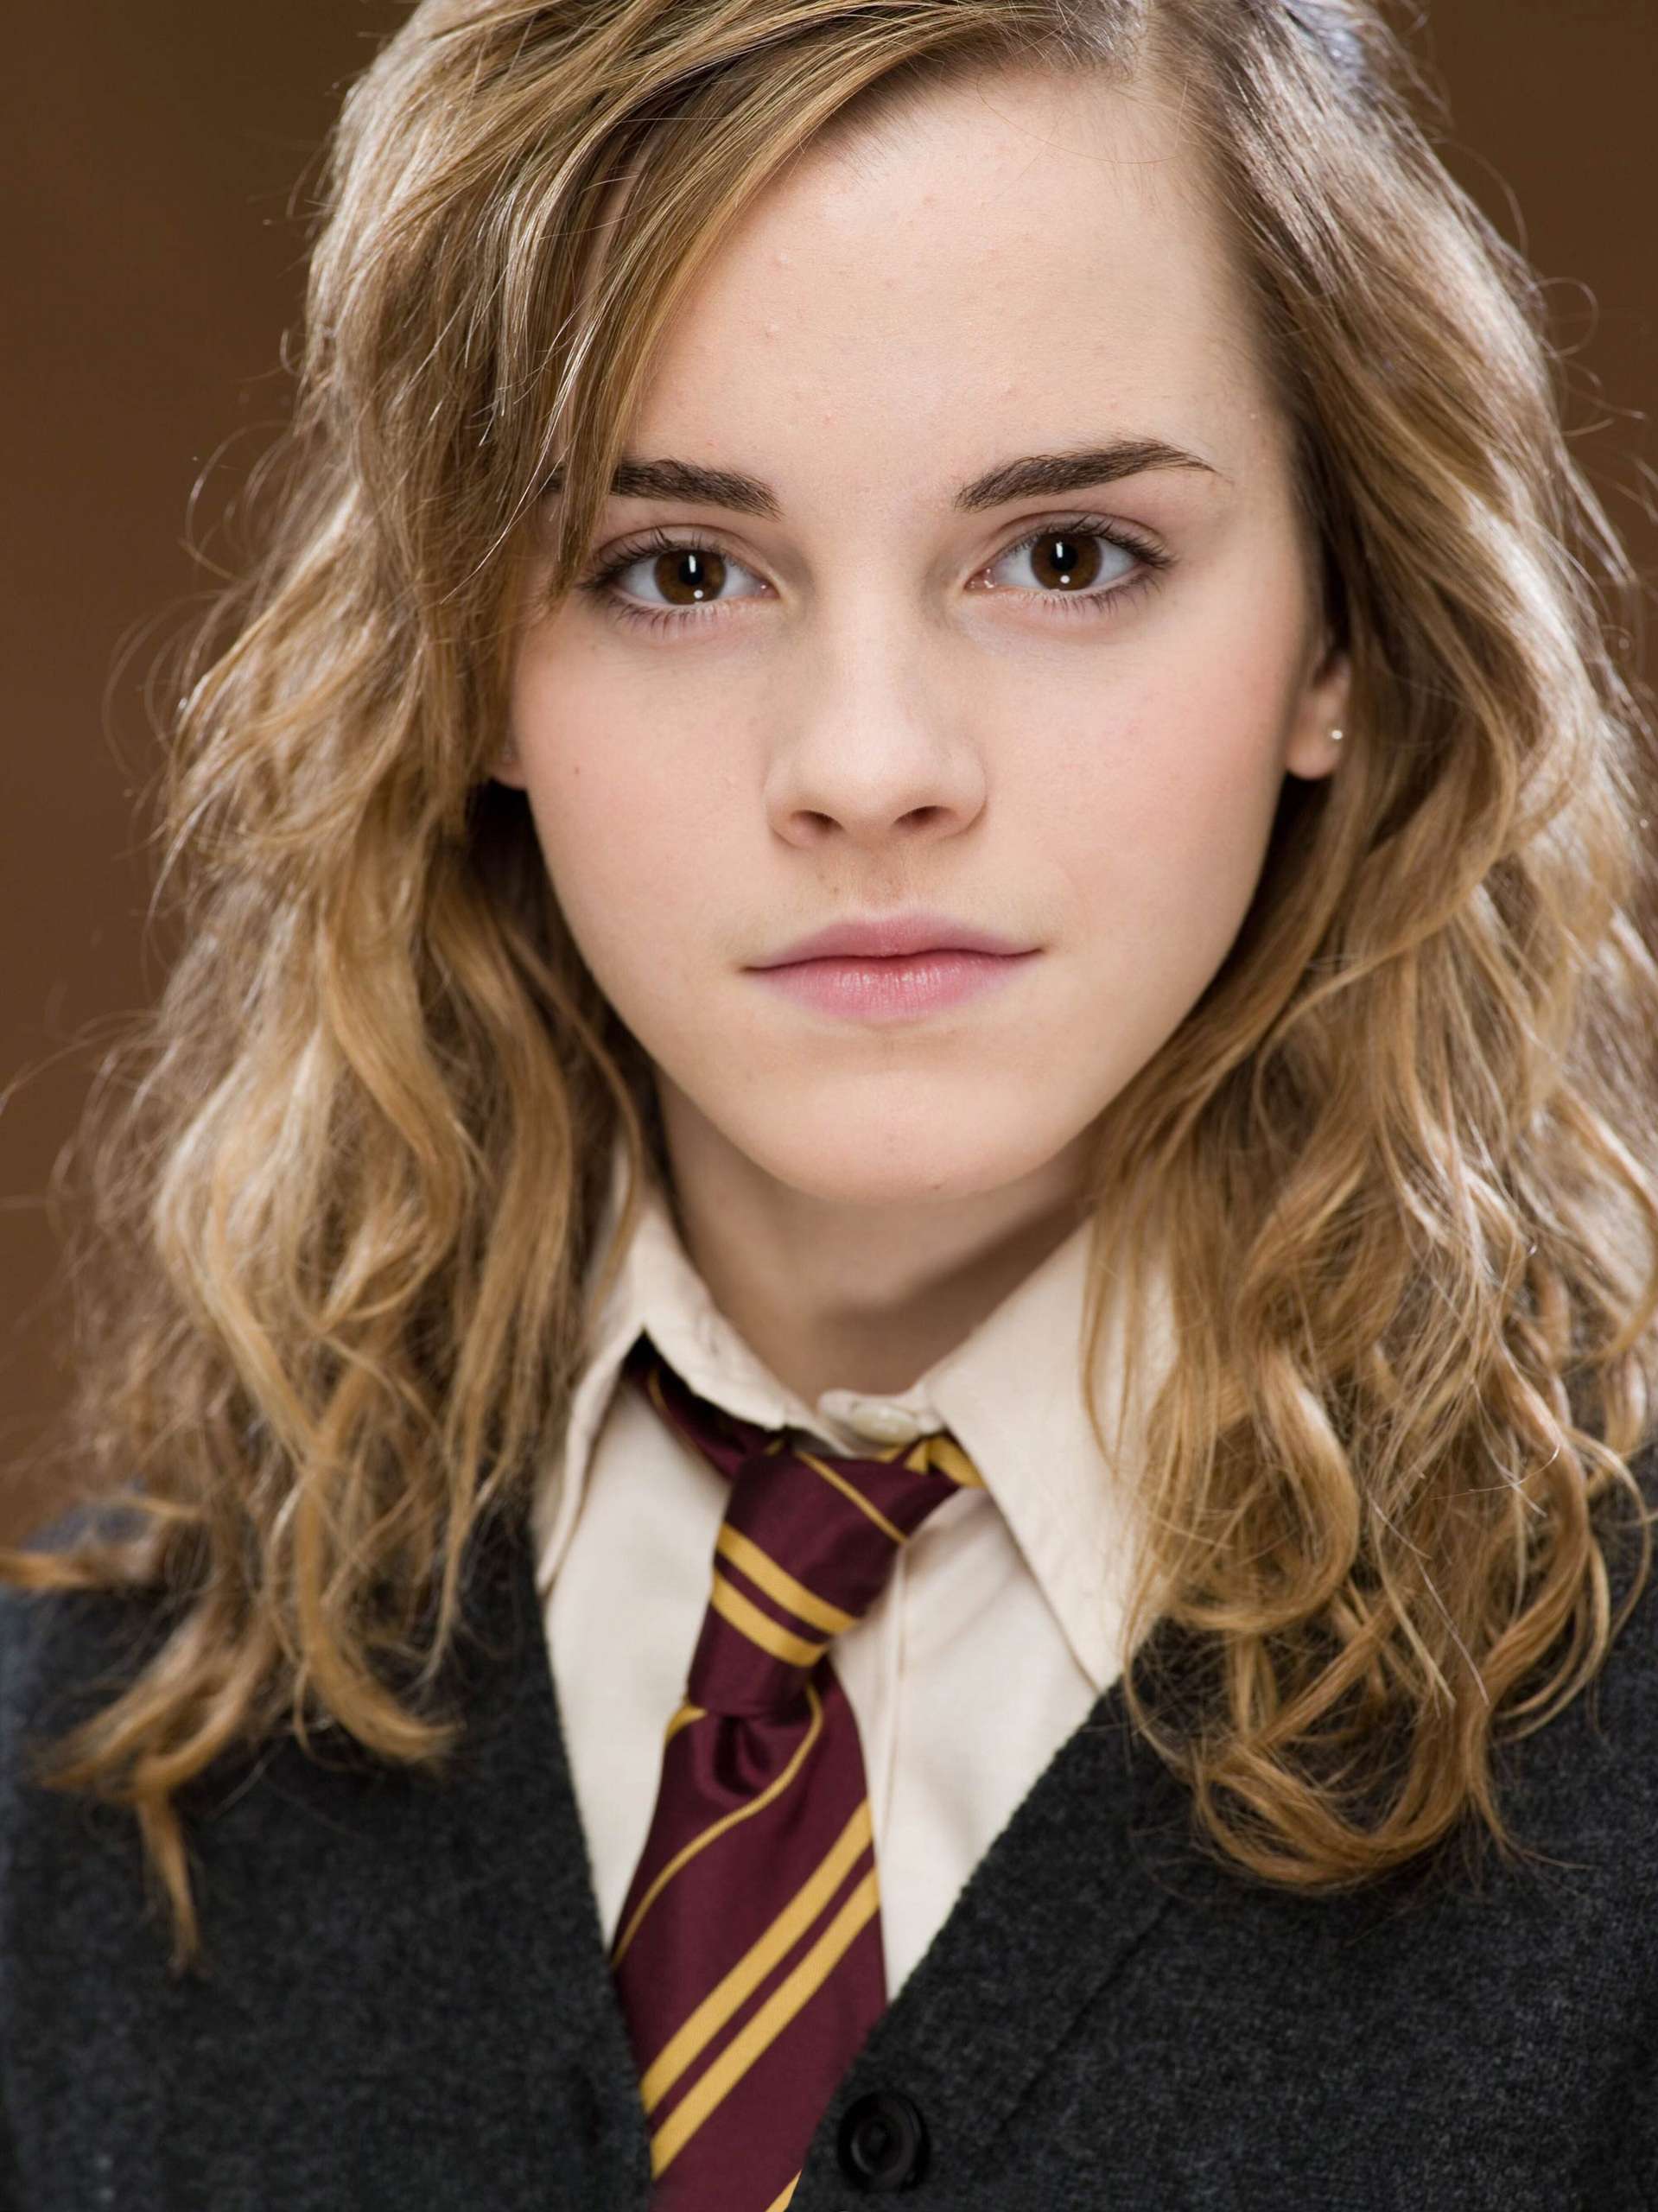 H is for Hermione Granger